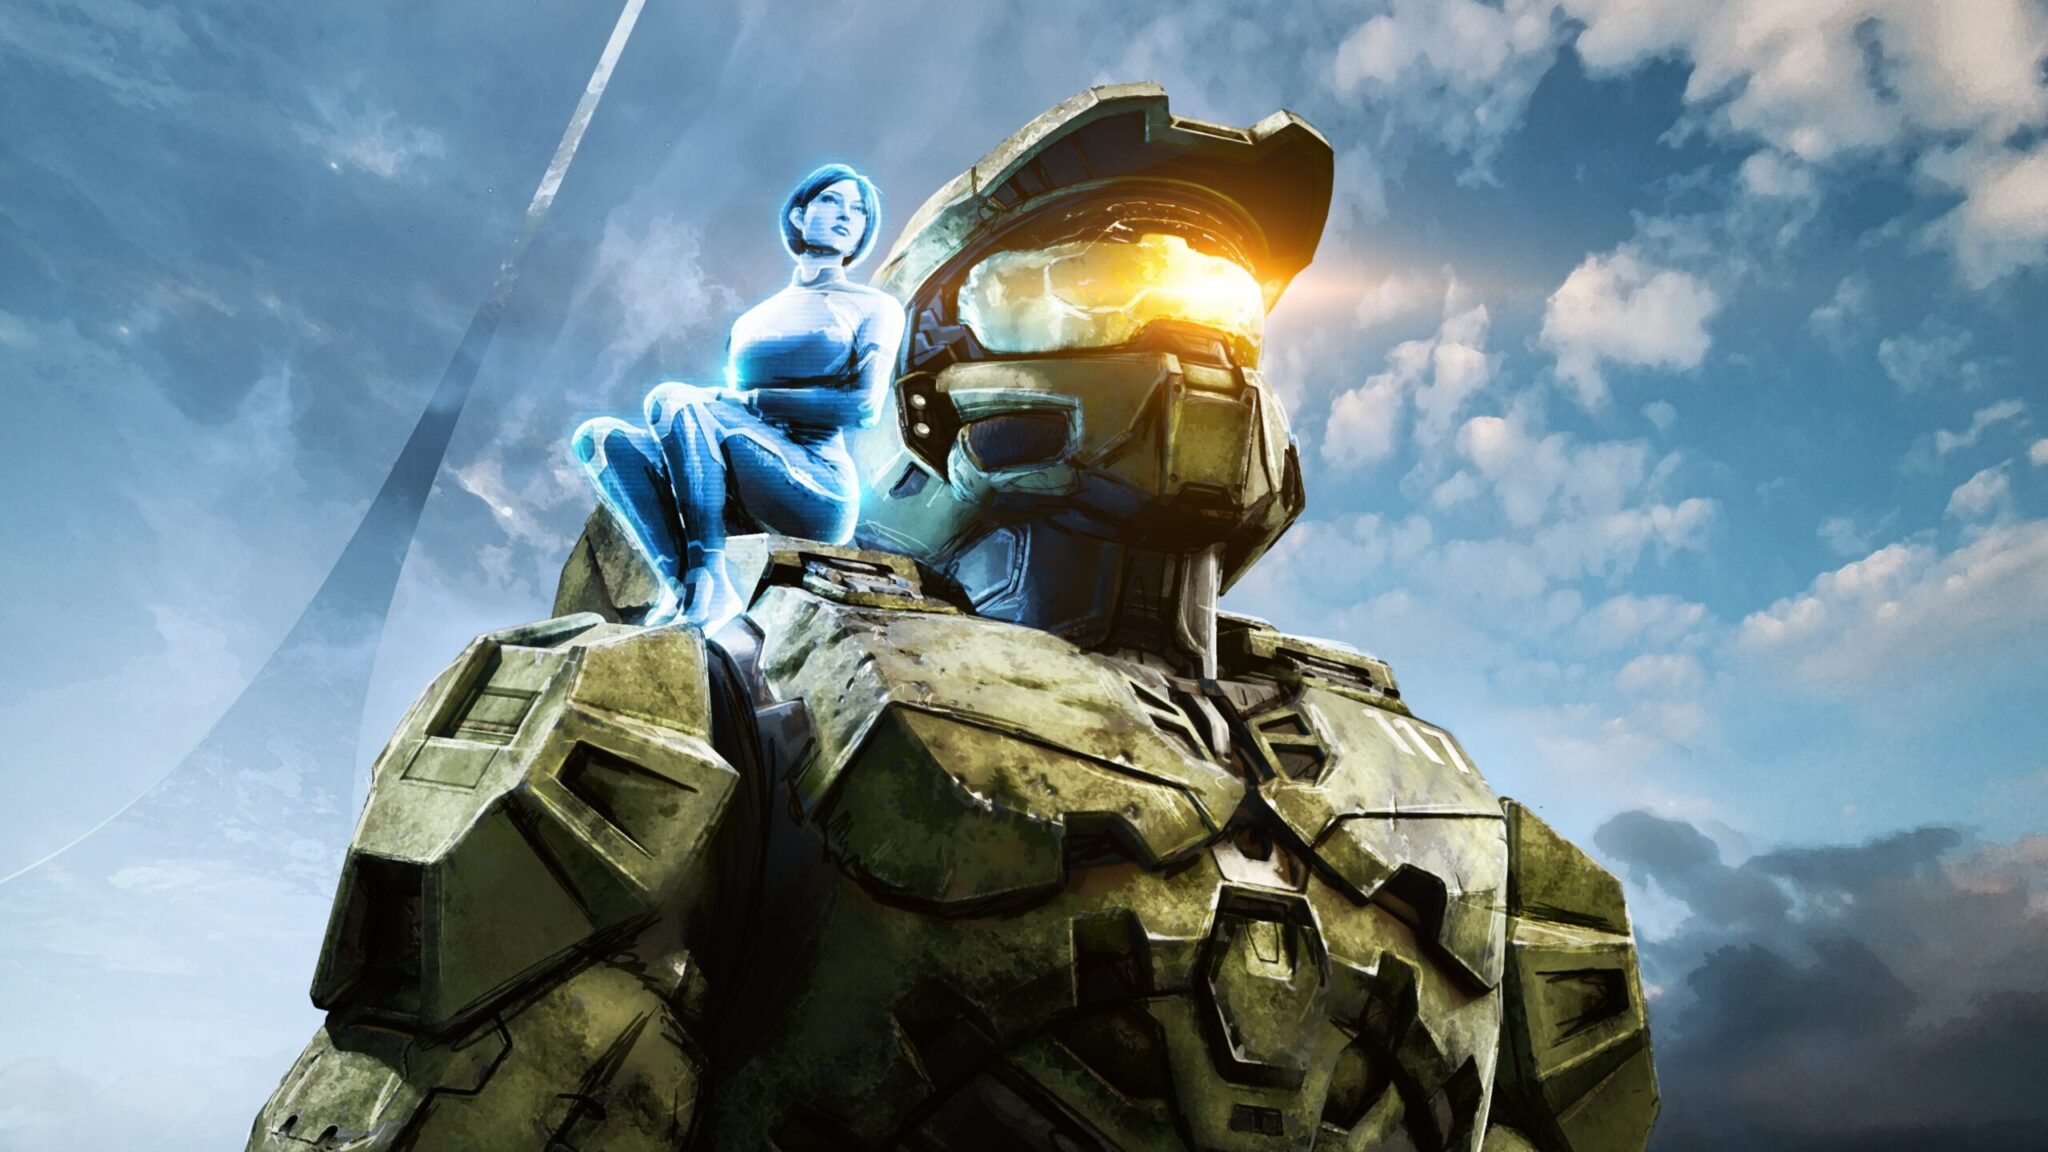 Why Halo Will Never Return To The Glory Days